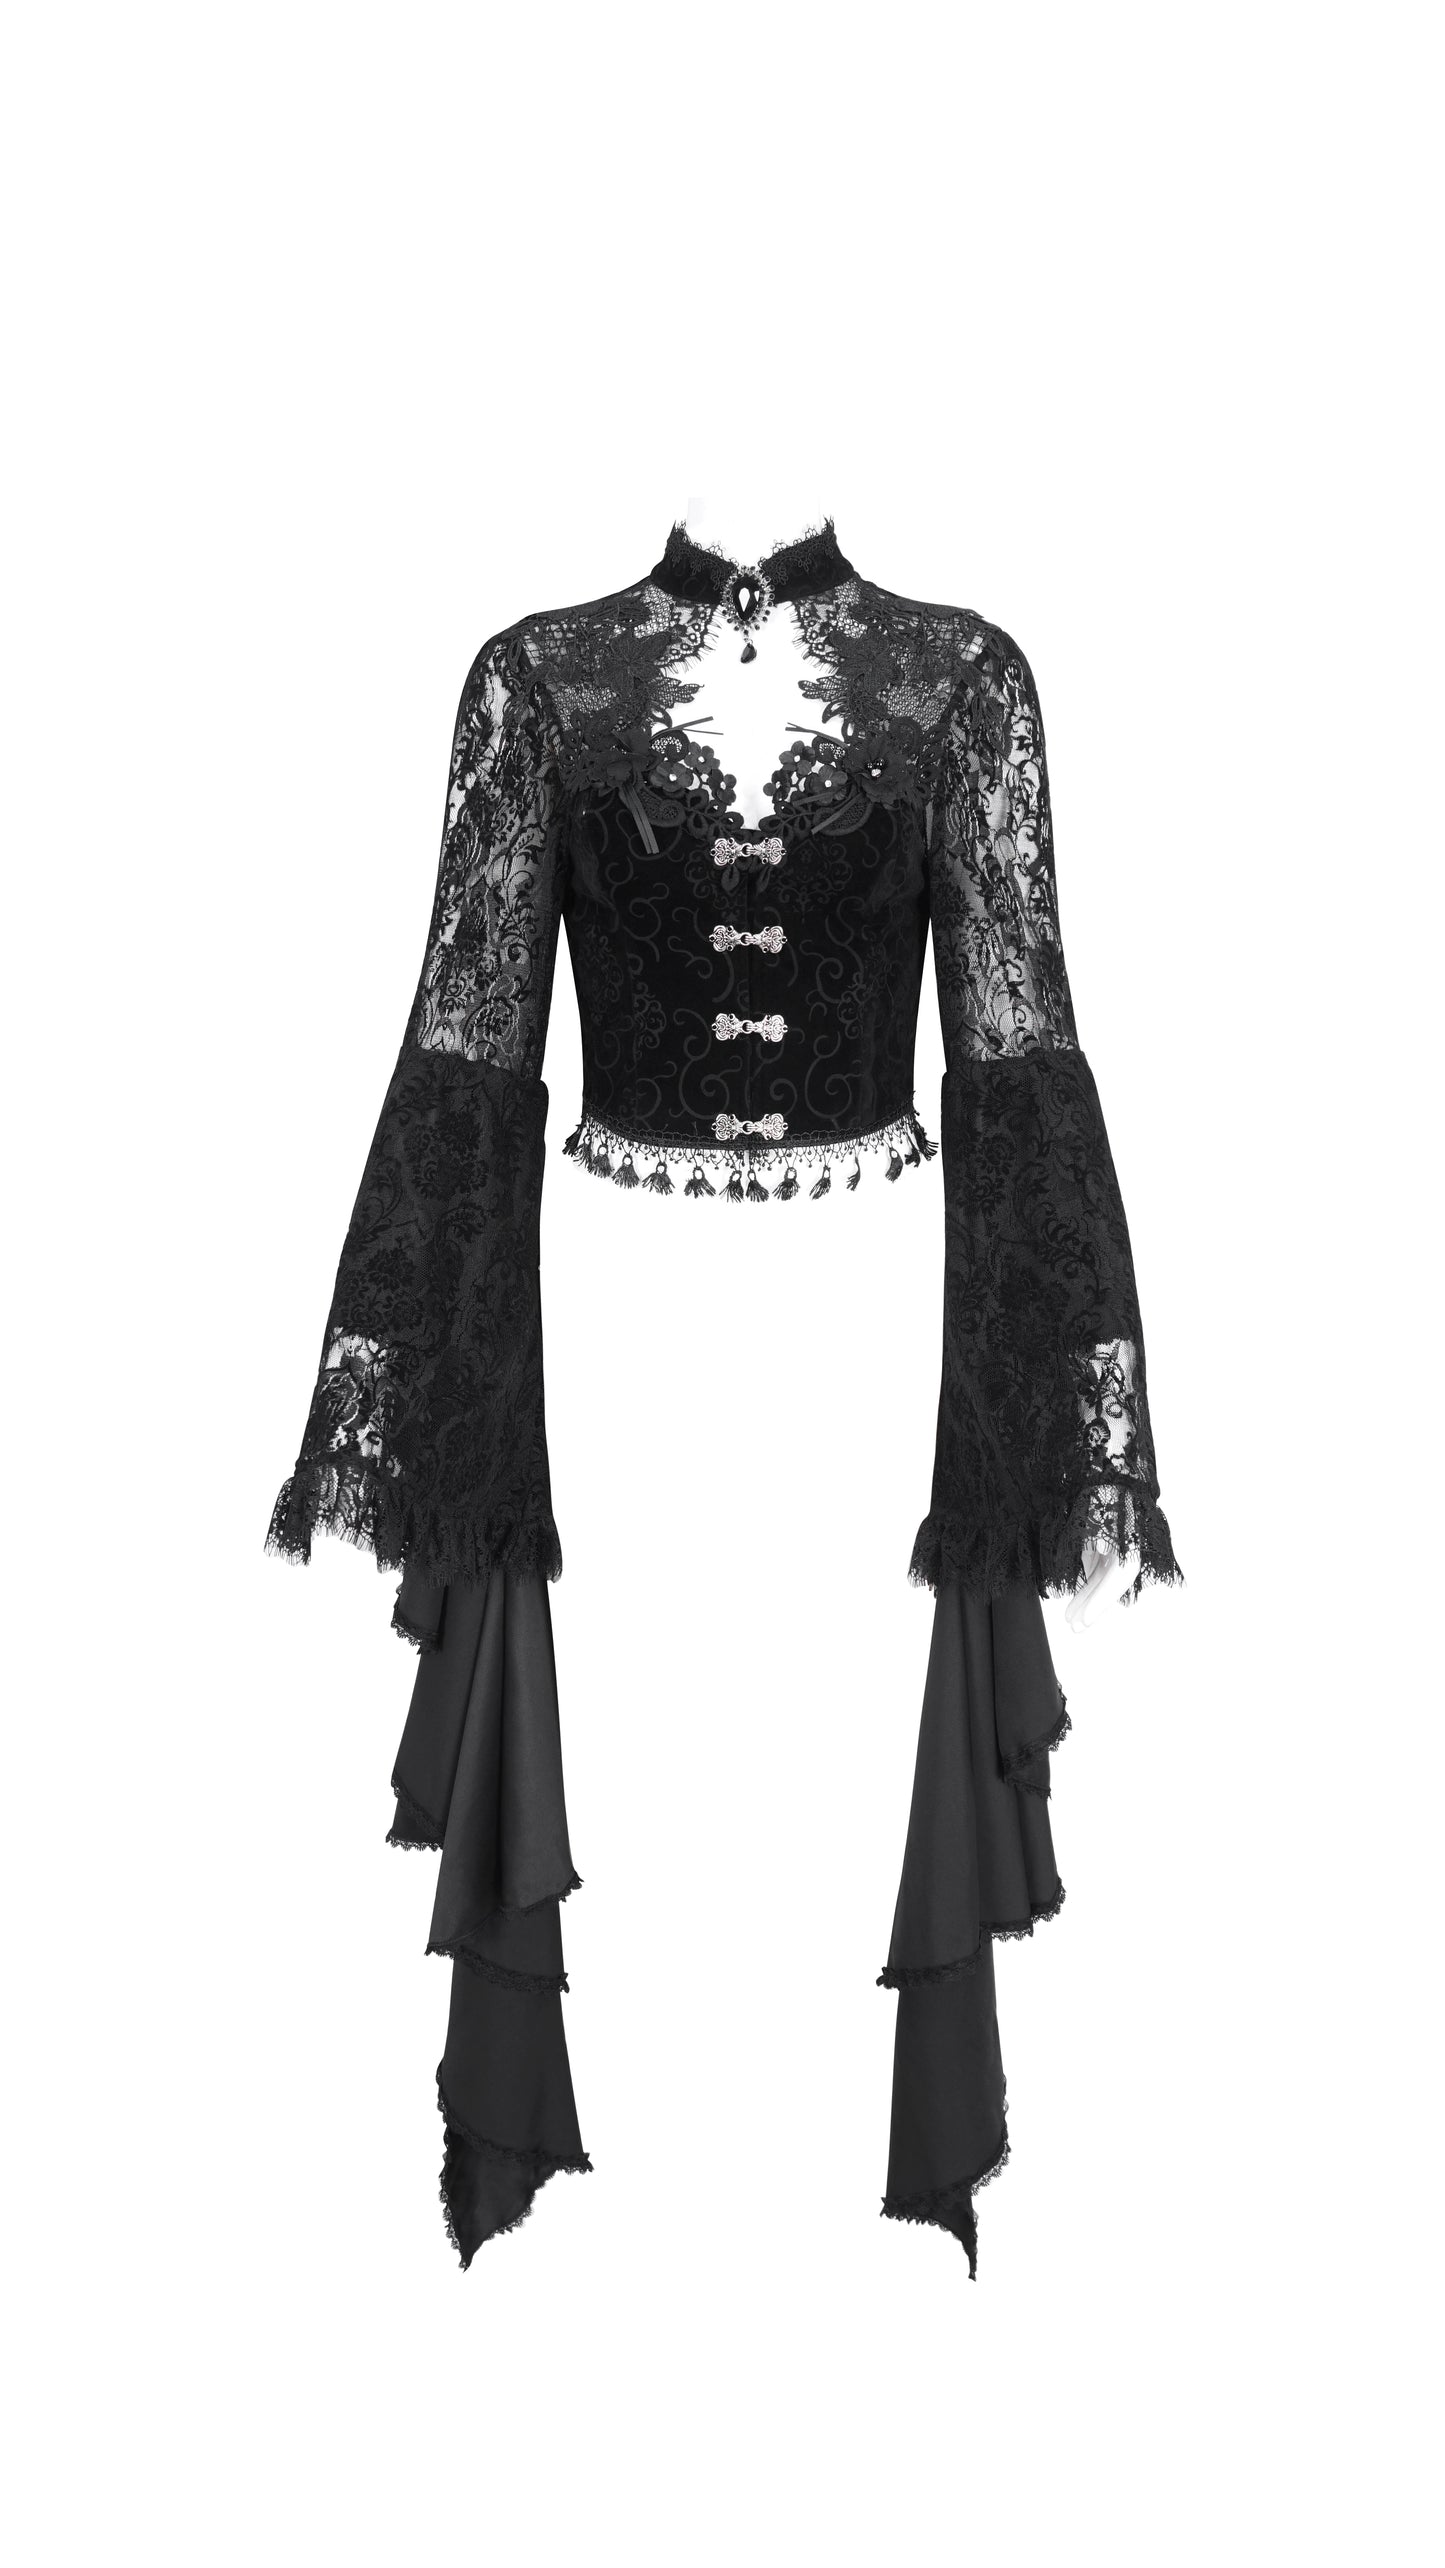 Weeping Beauty Lace Bell Sleeve Gothic Cropped Jacket Top by Eva Lady